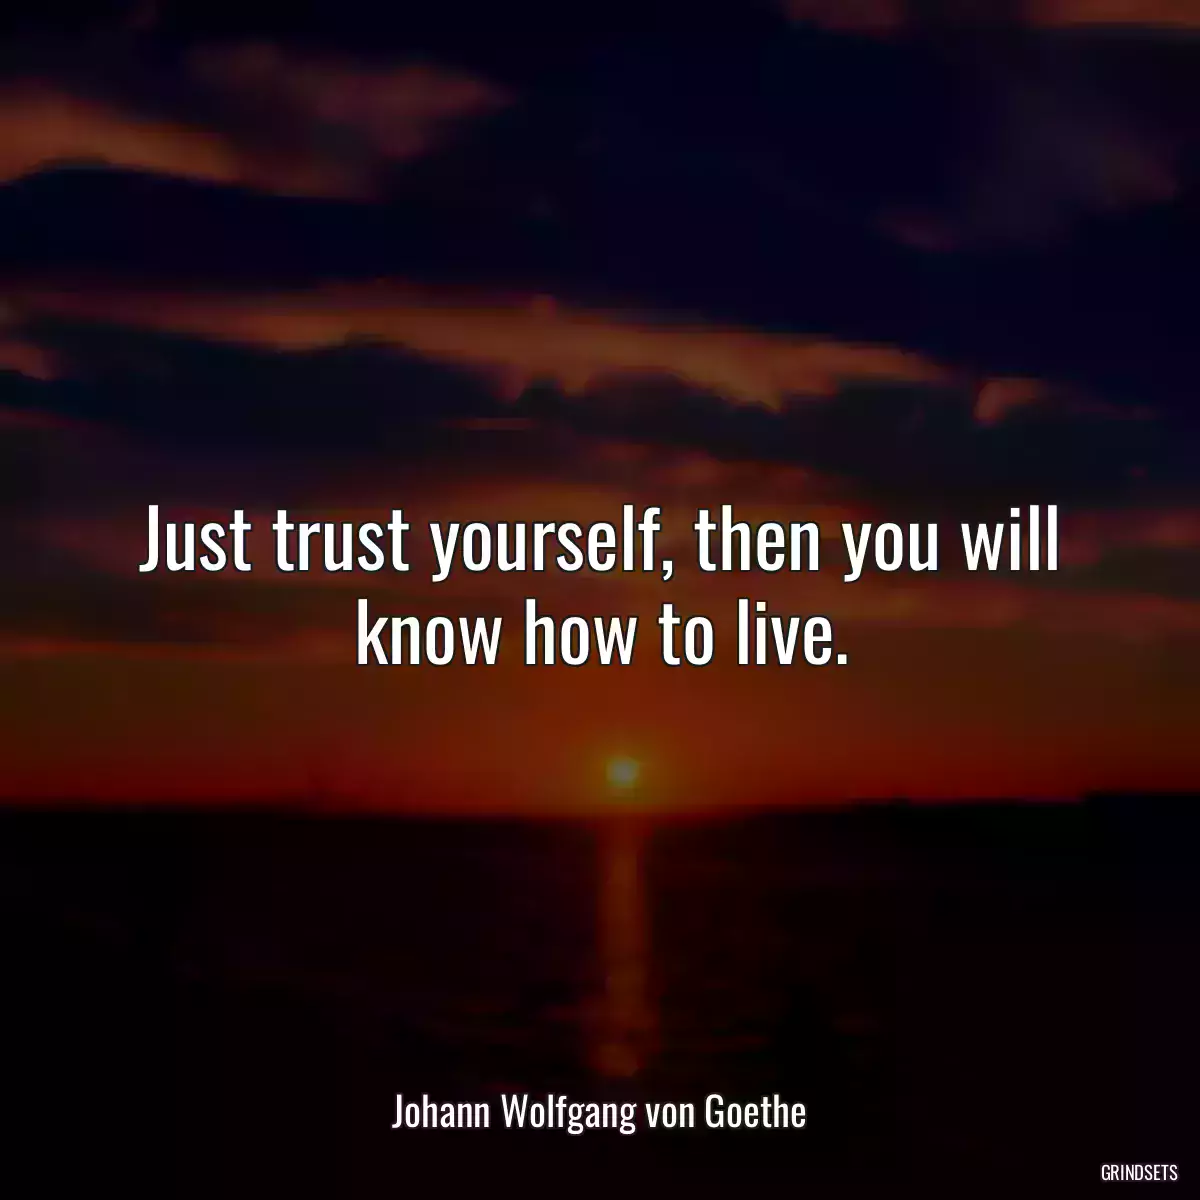 Just trust yourself, then you will know how to live.